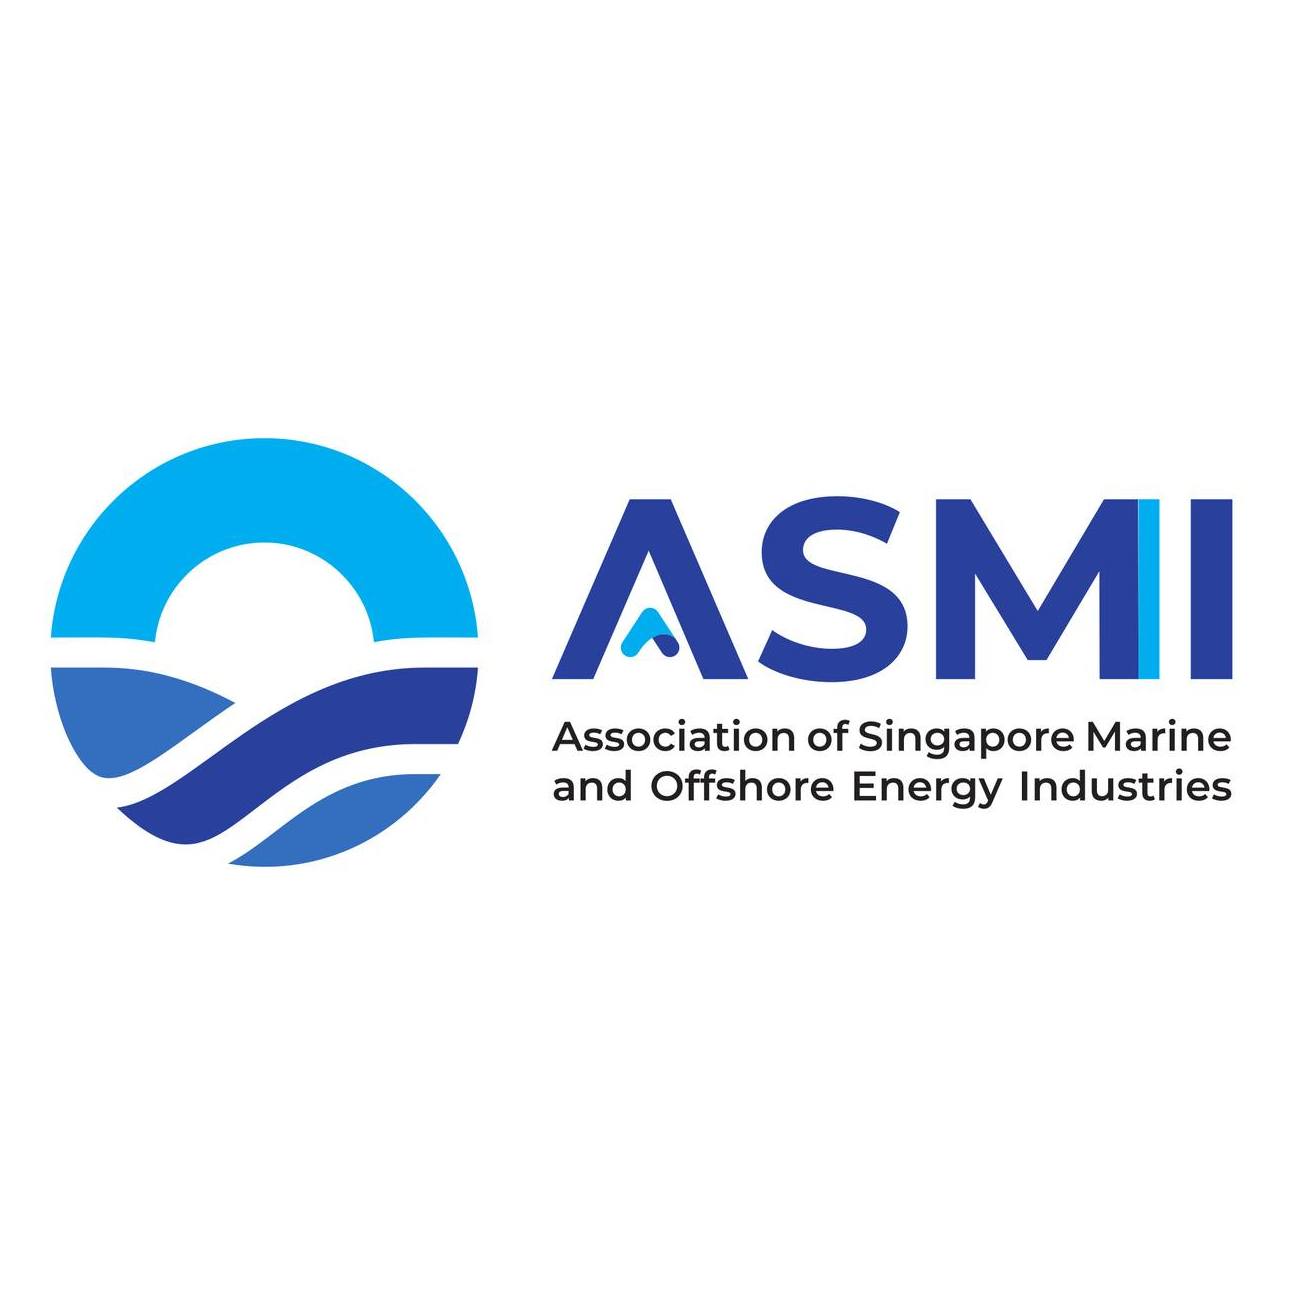 Association of Singapore Marine and Offshore Energy Industries